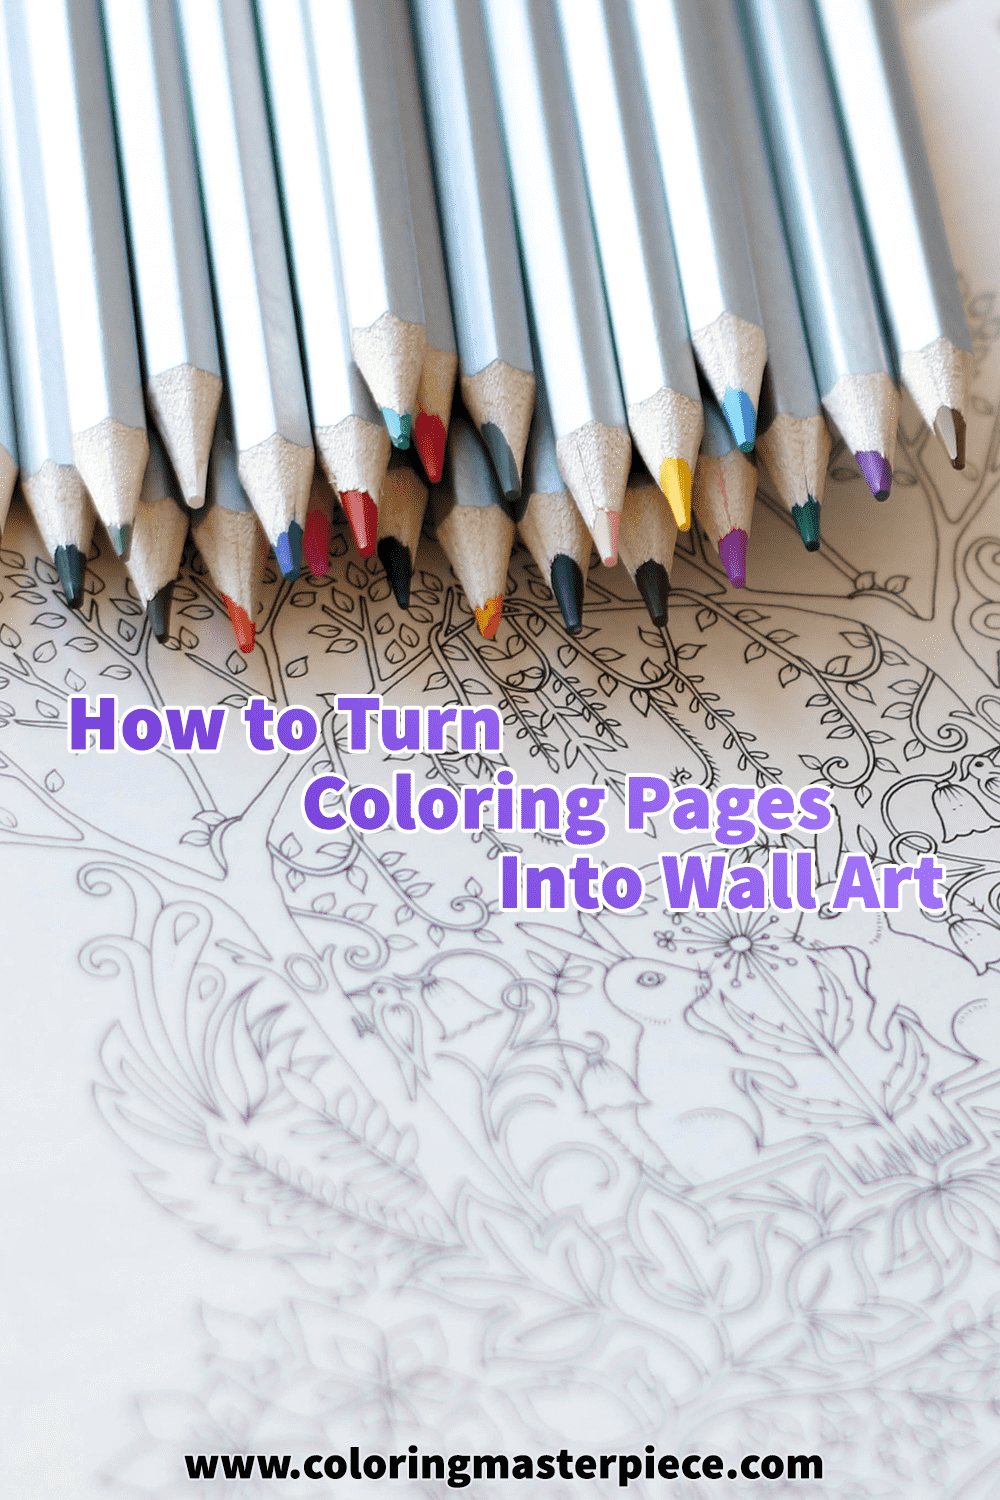 How to Turn Coloring Pages Into Wall Art – Adult Coloring Resources